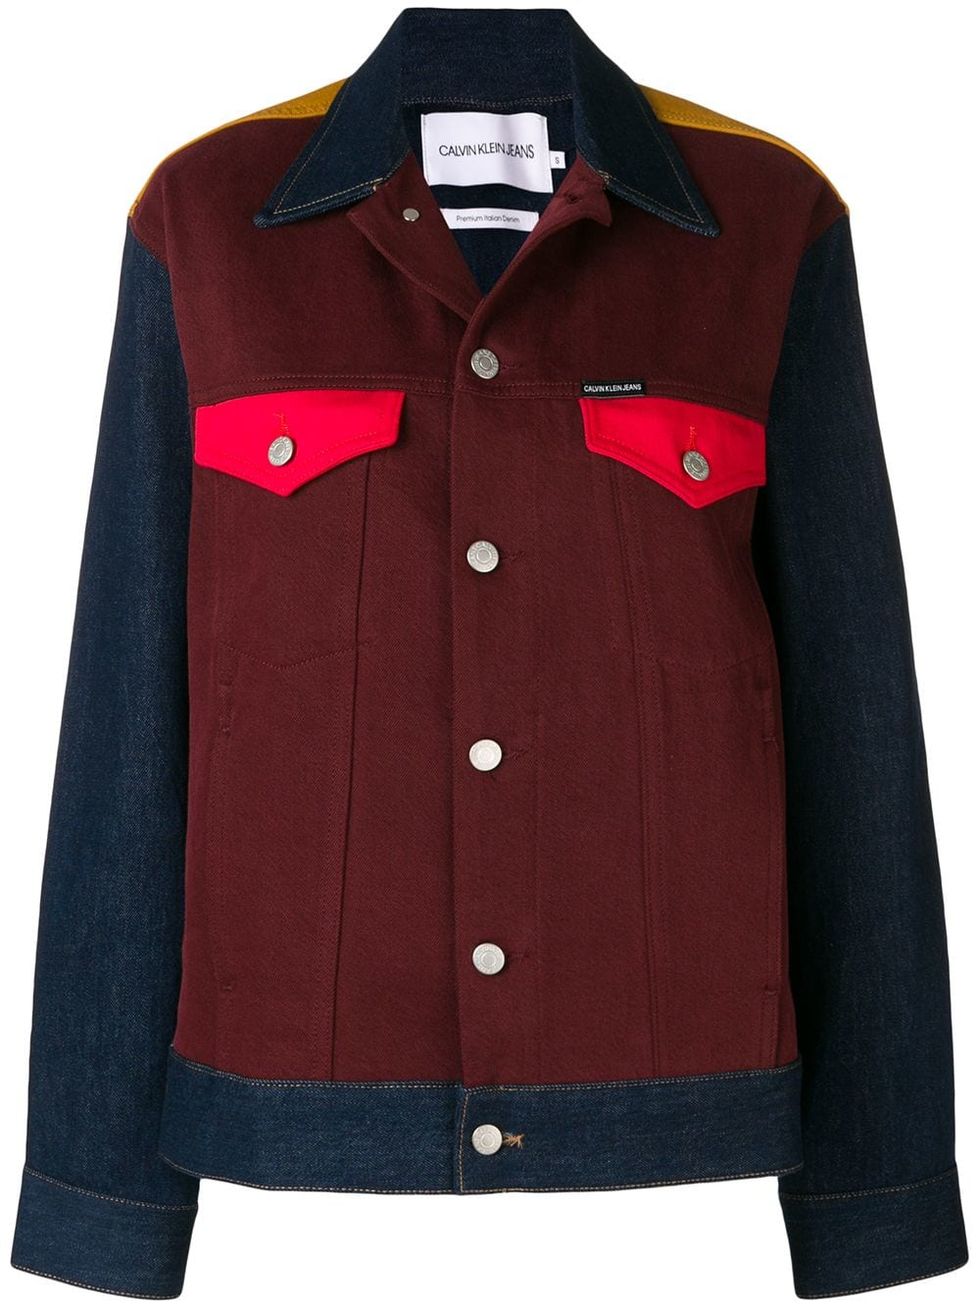 Clothing, Outerwear, Jacket, Sleeve, Red, Maroon, Fashion, Collar, Button, Pocket, 